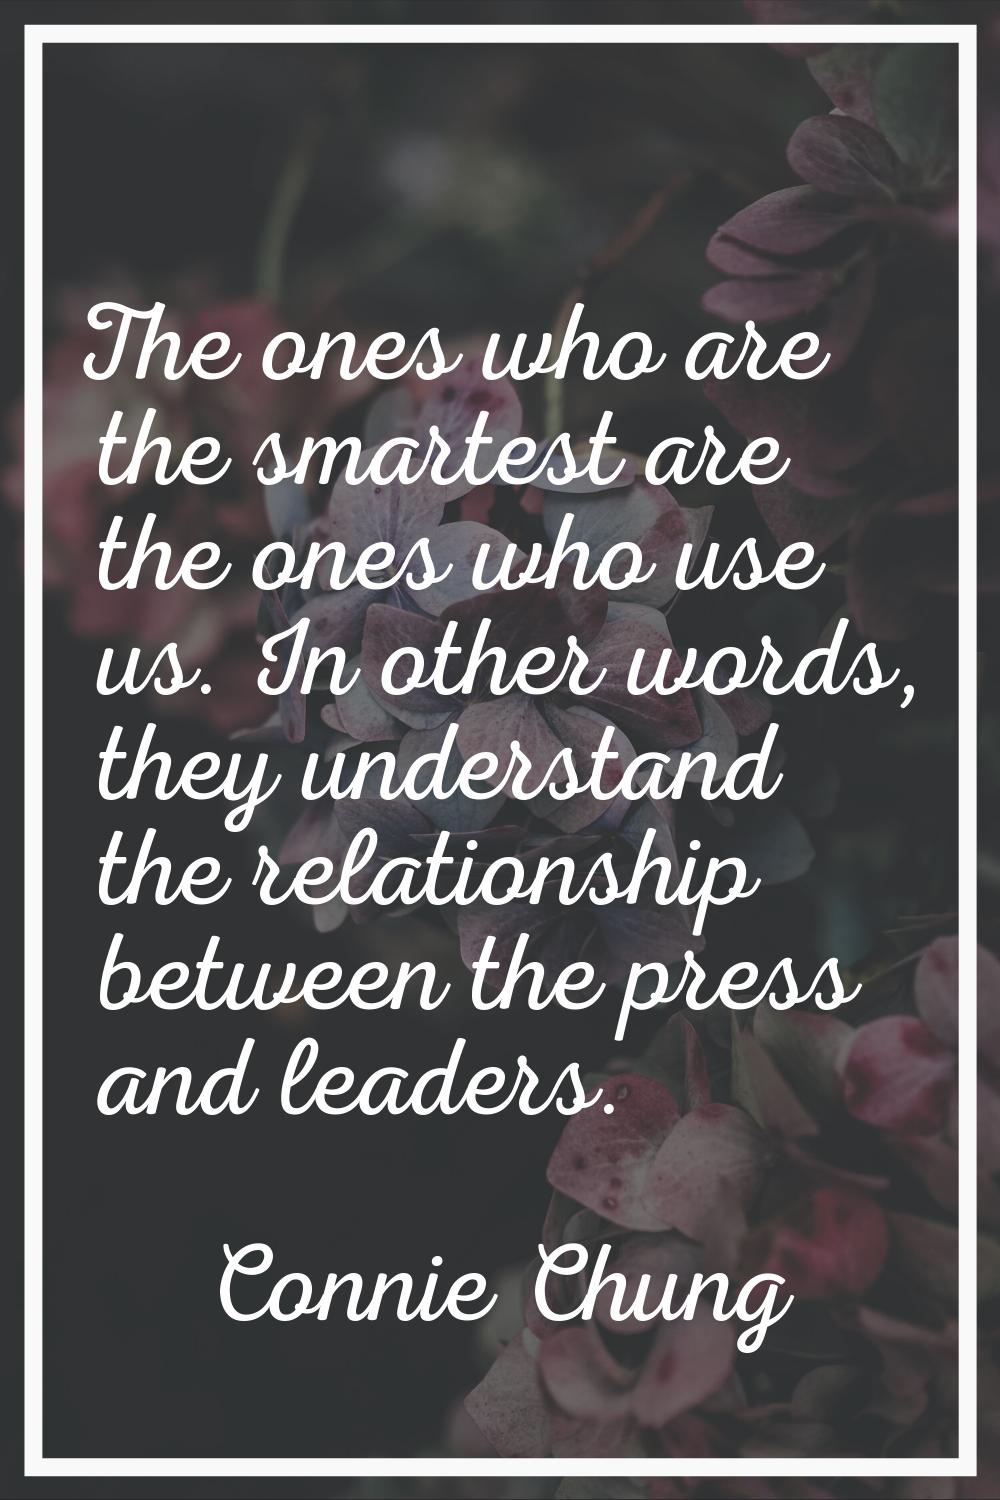 The ones who are the smartest are the ones who use us. In other words, they understand the relation